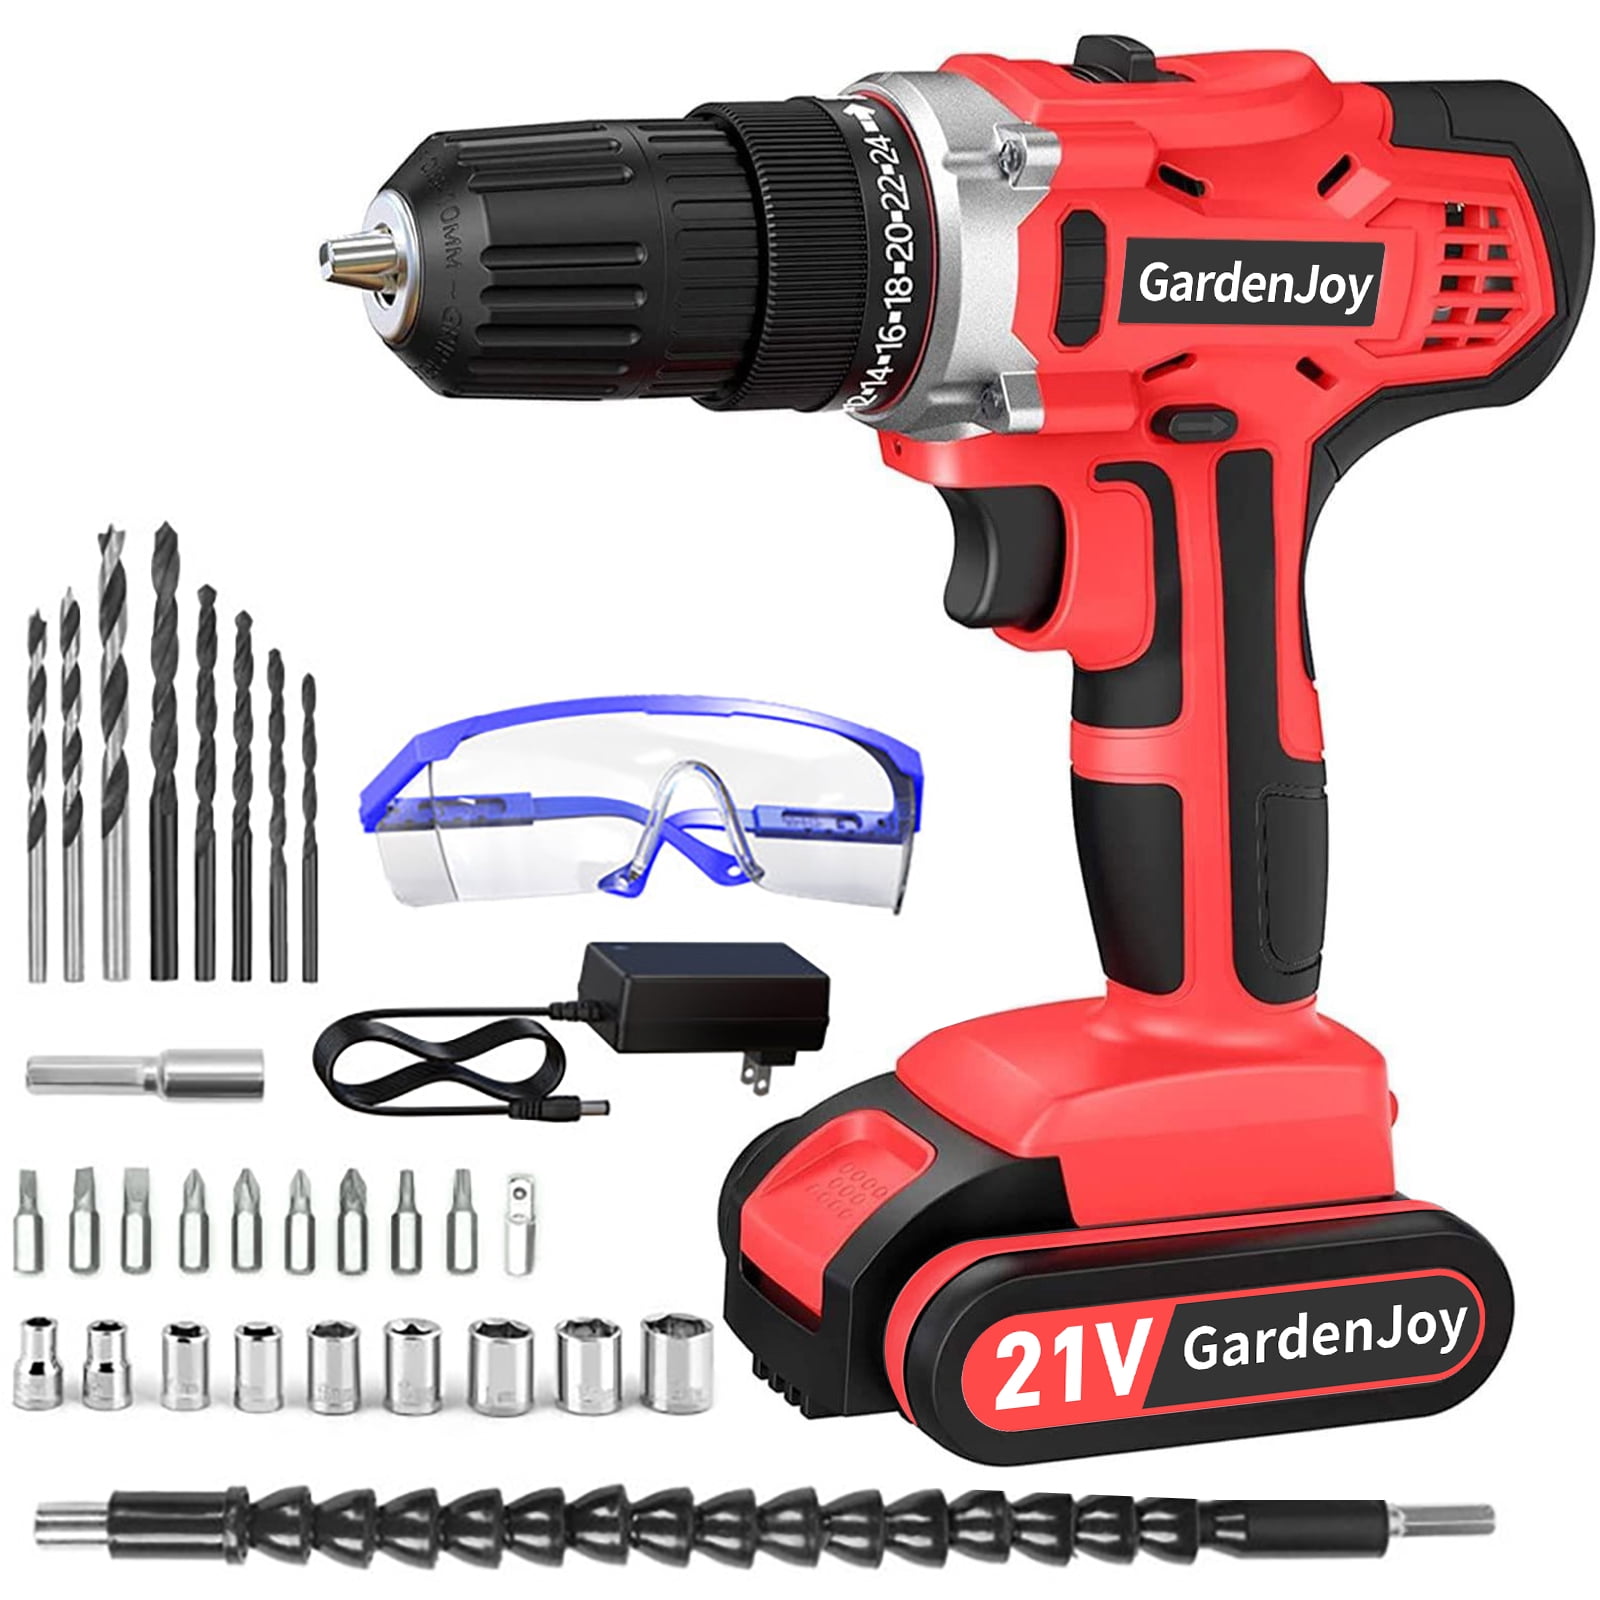 JOY TOWN JoyTown Kids Real Power Drill Set â€“ Electric Cordless Drill Tool  Kit for Children with Interchangeable Bits, Flexible